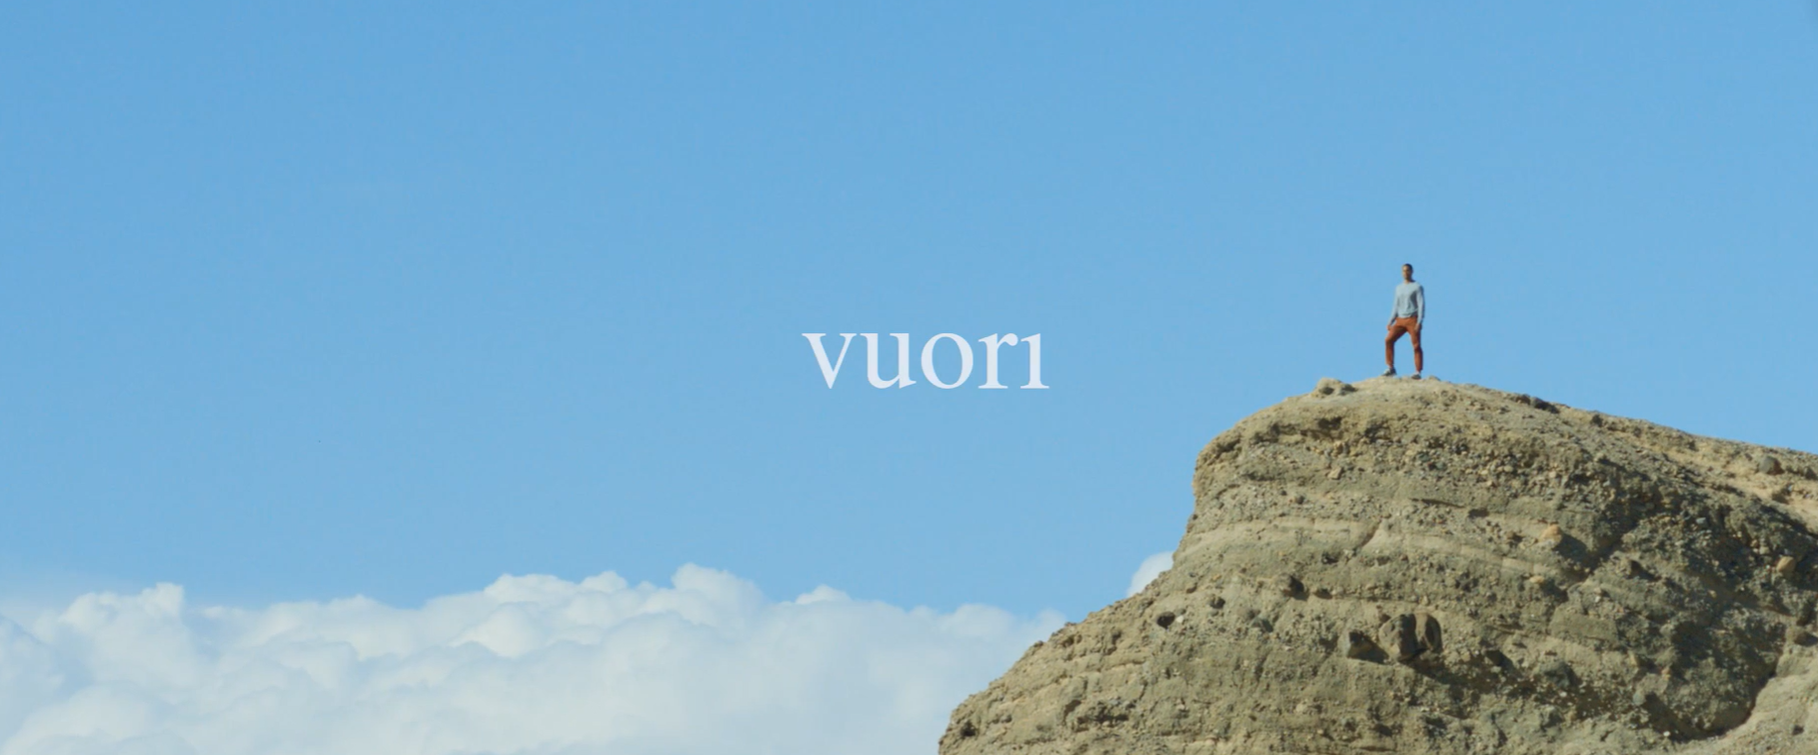 Vuori: Growth Fueled By a Passion for Quality and the Southern